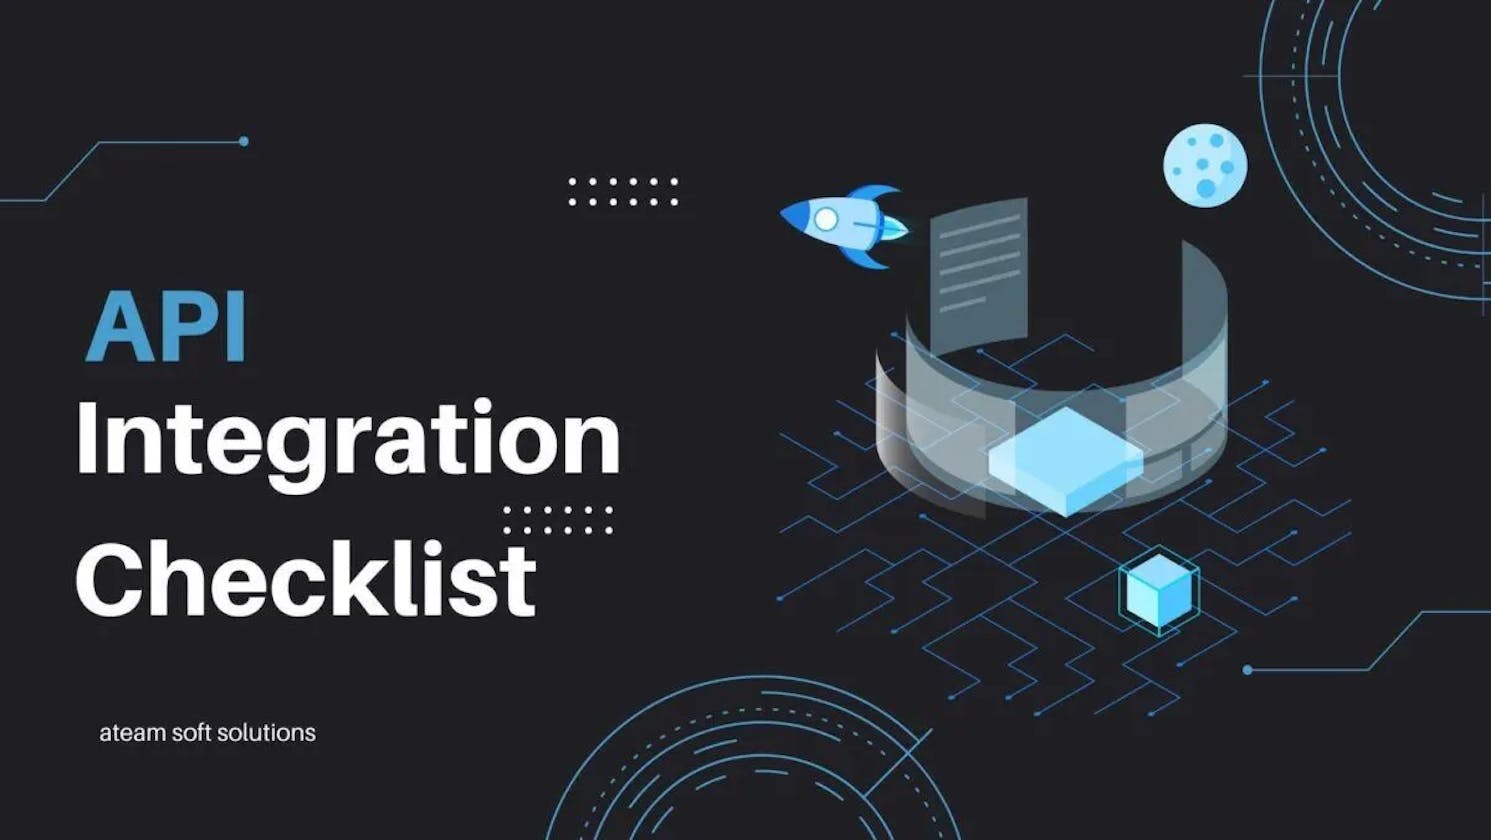 API Integration Checklist for Verifying Endpoints and Authentication